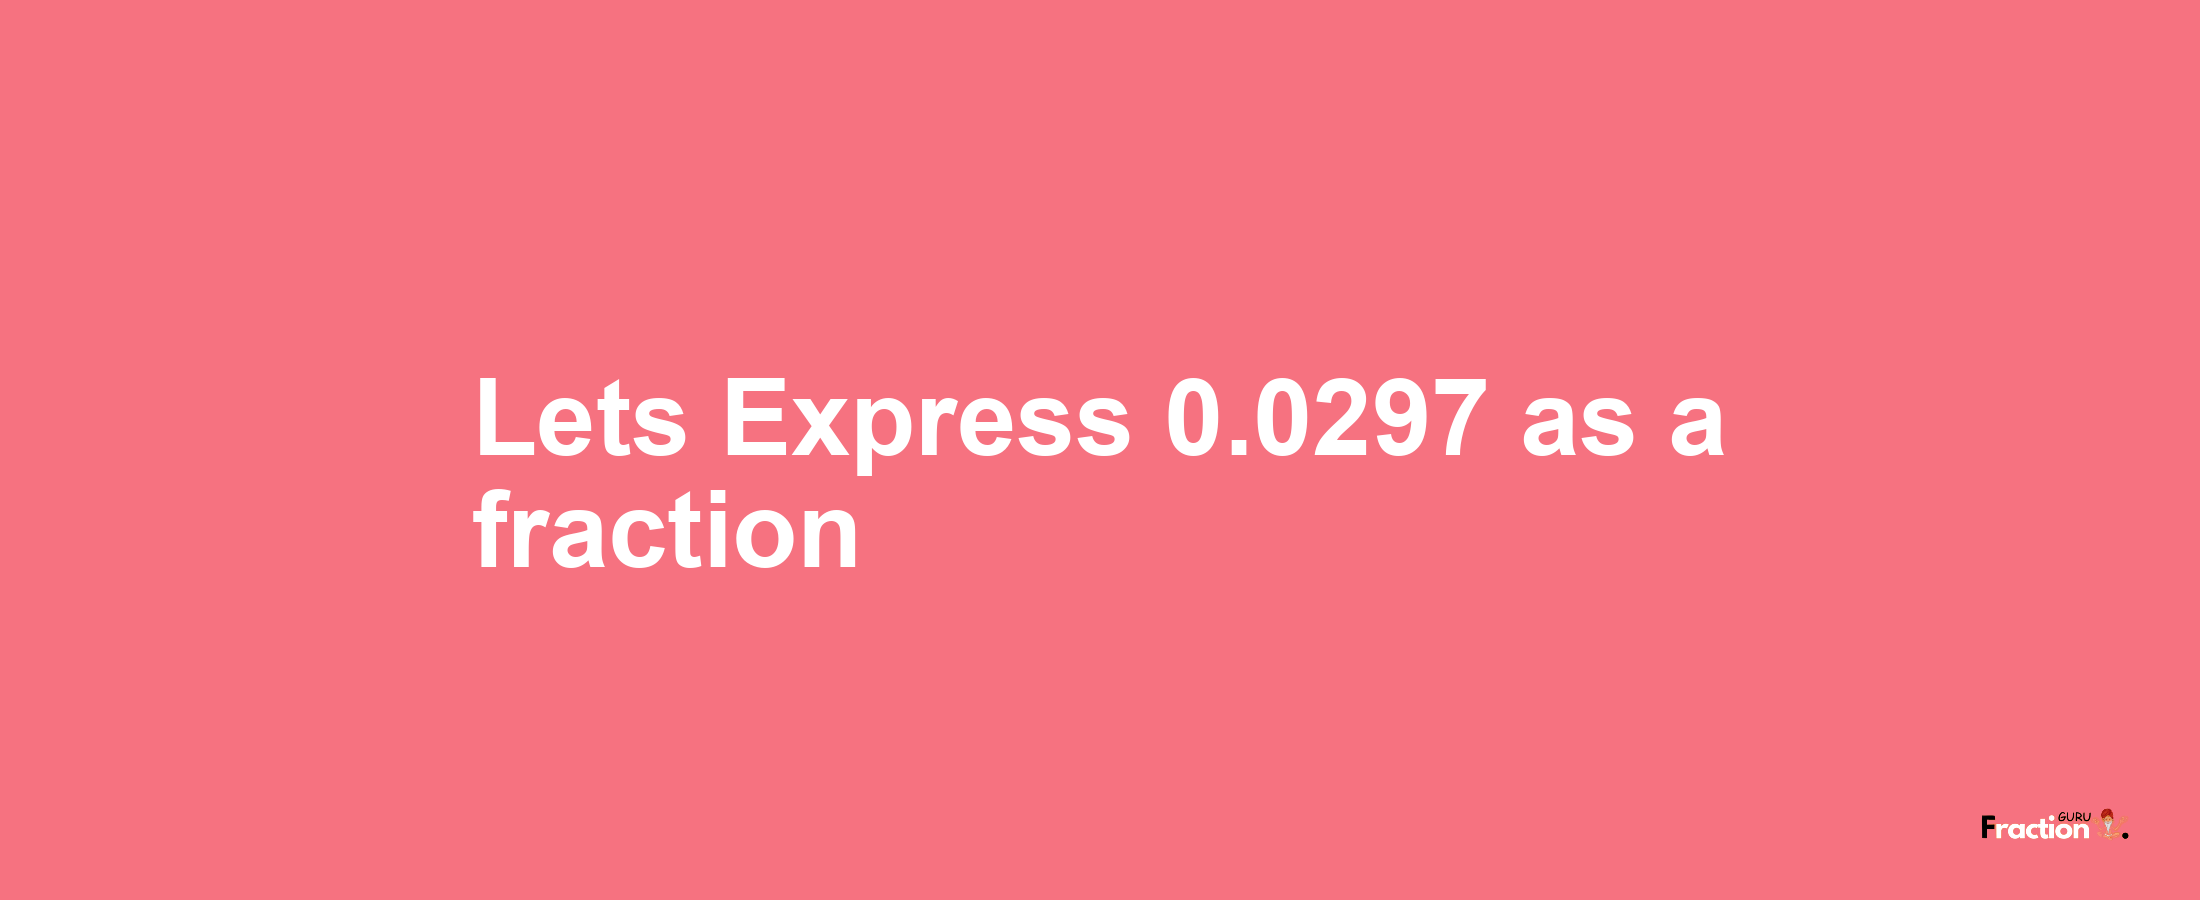 Lets Express 0.0297 as afraction